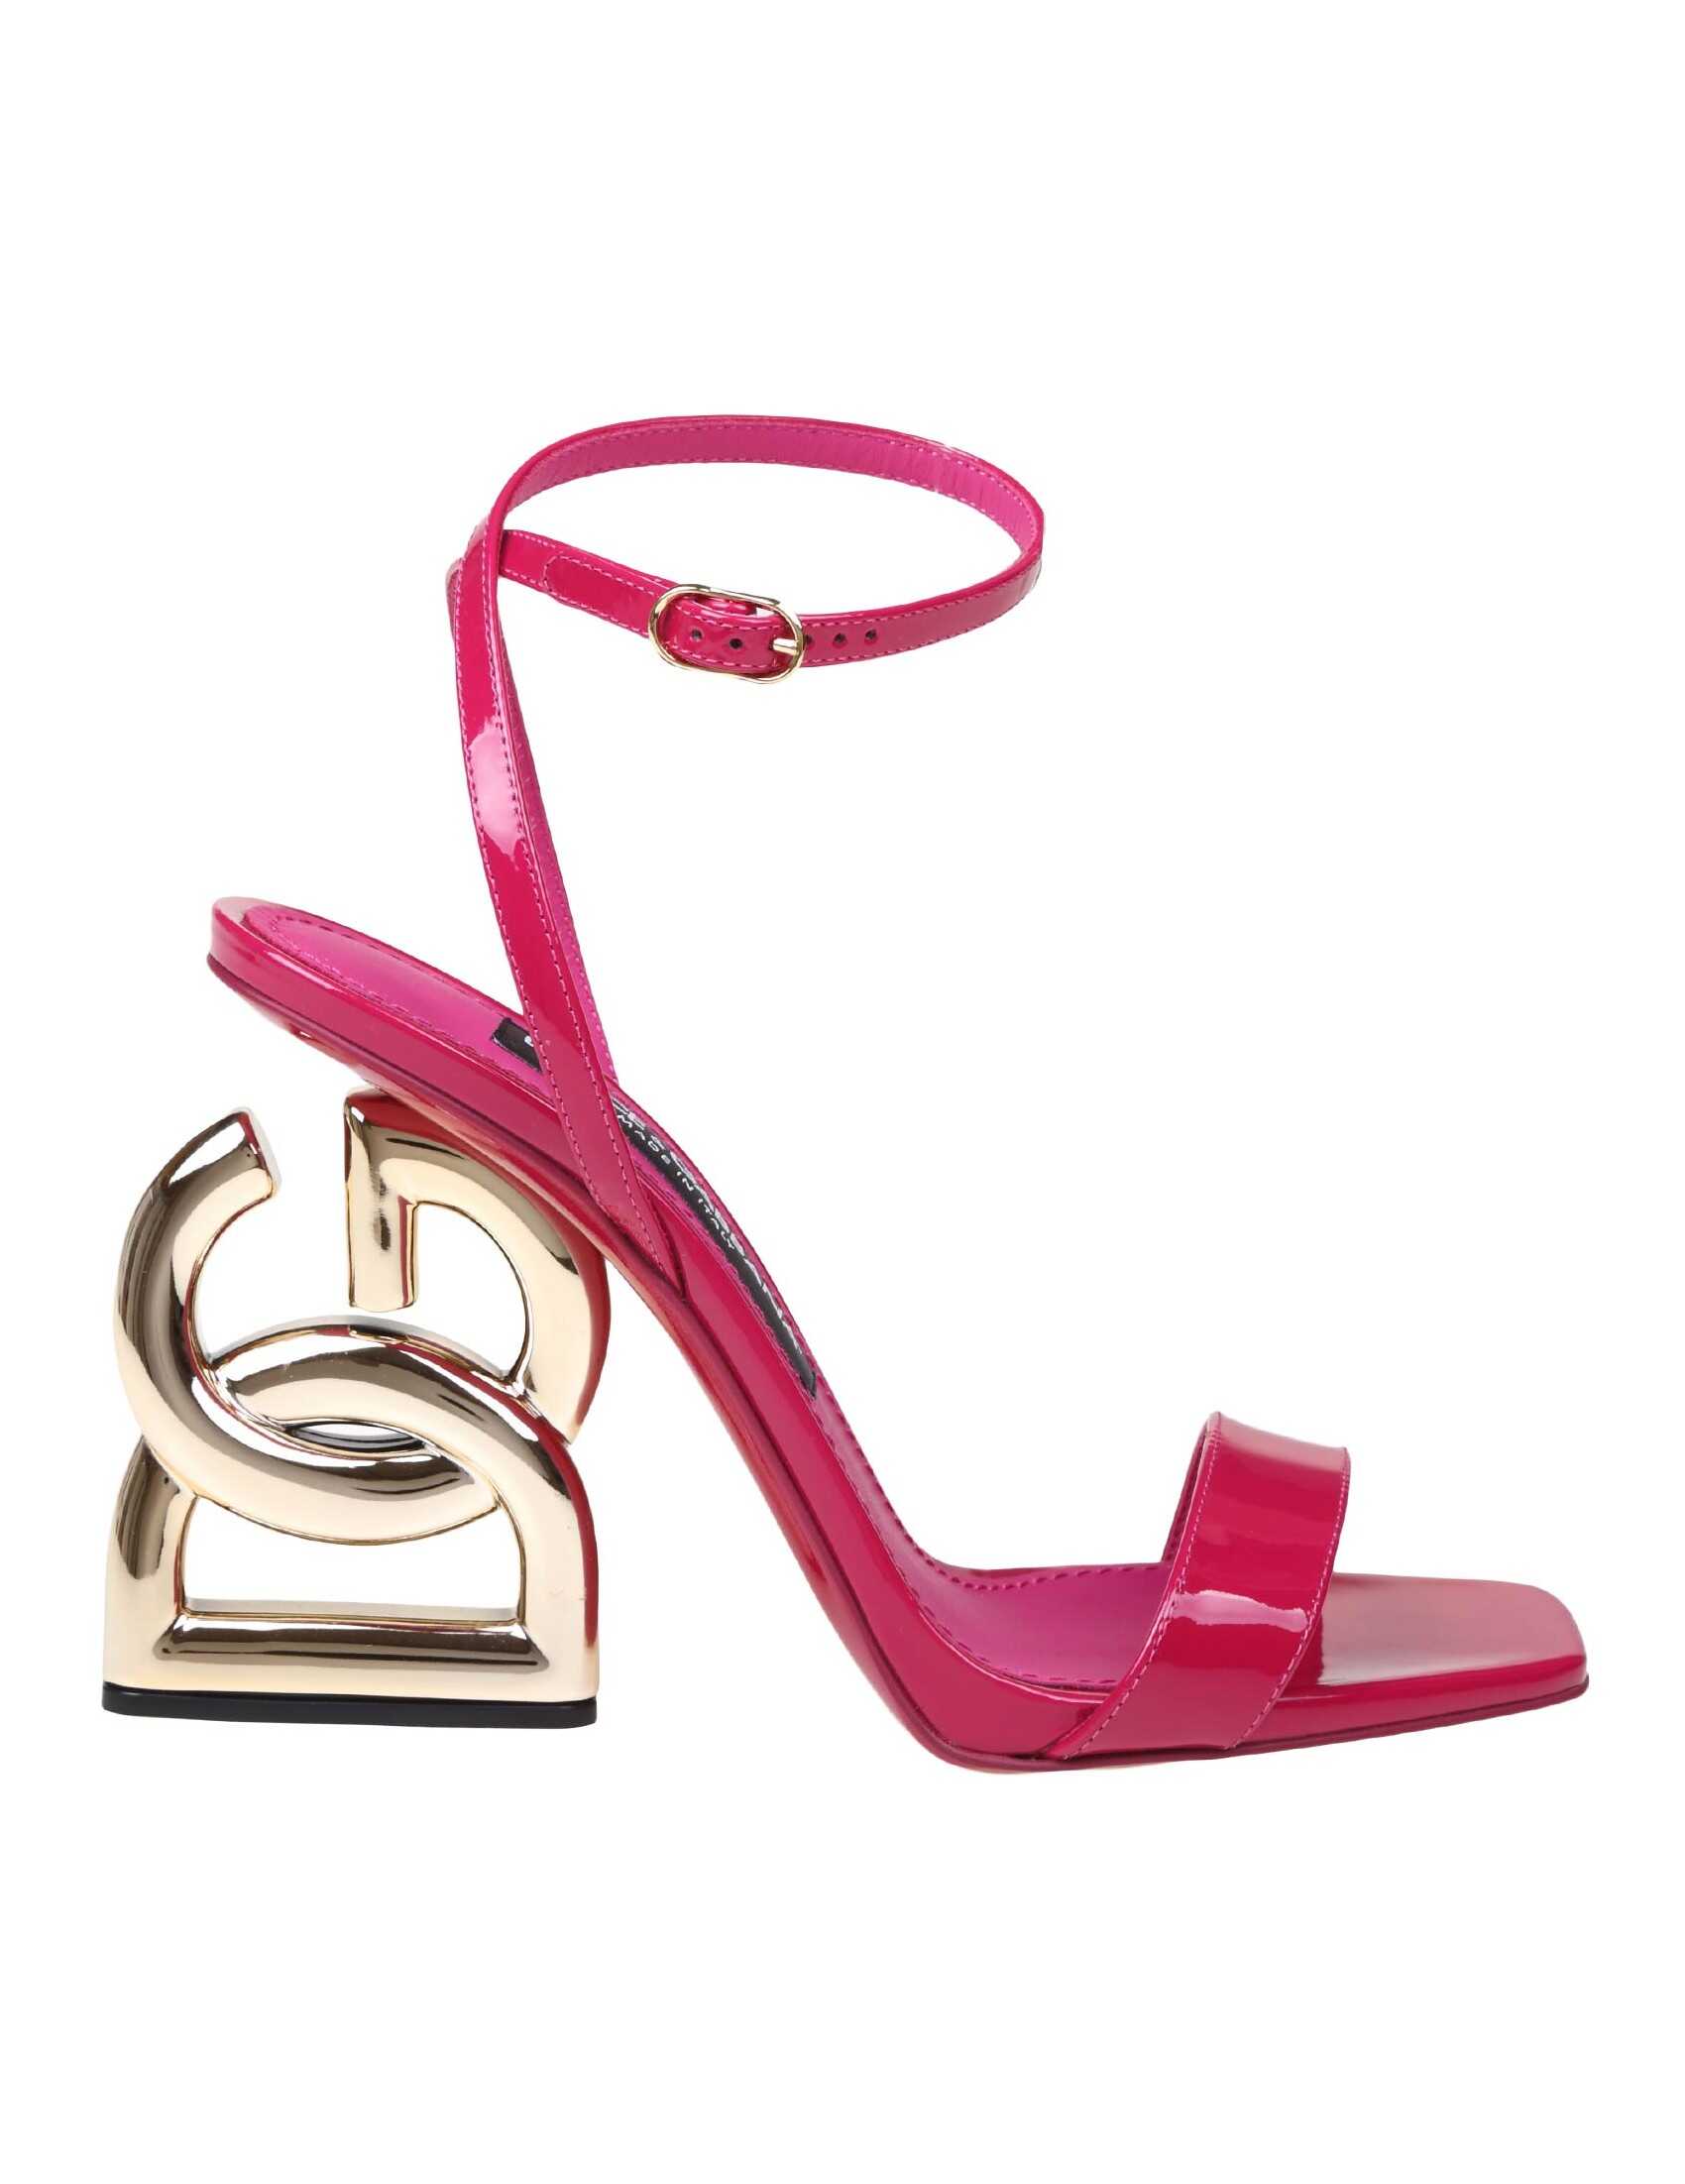 Dolce & Gabbana sandal in cyclamen color paint Pink